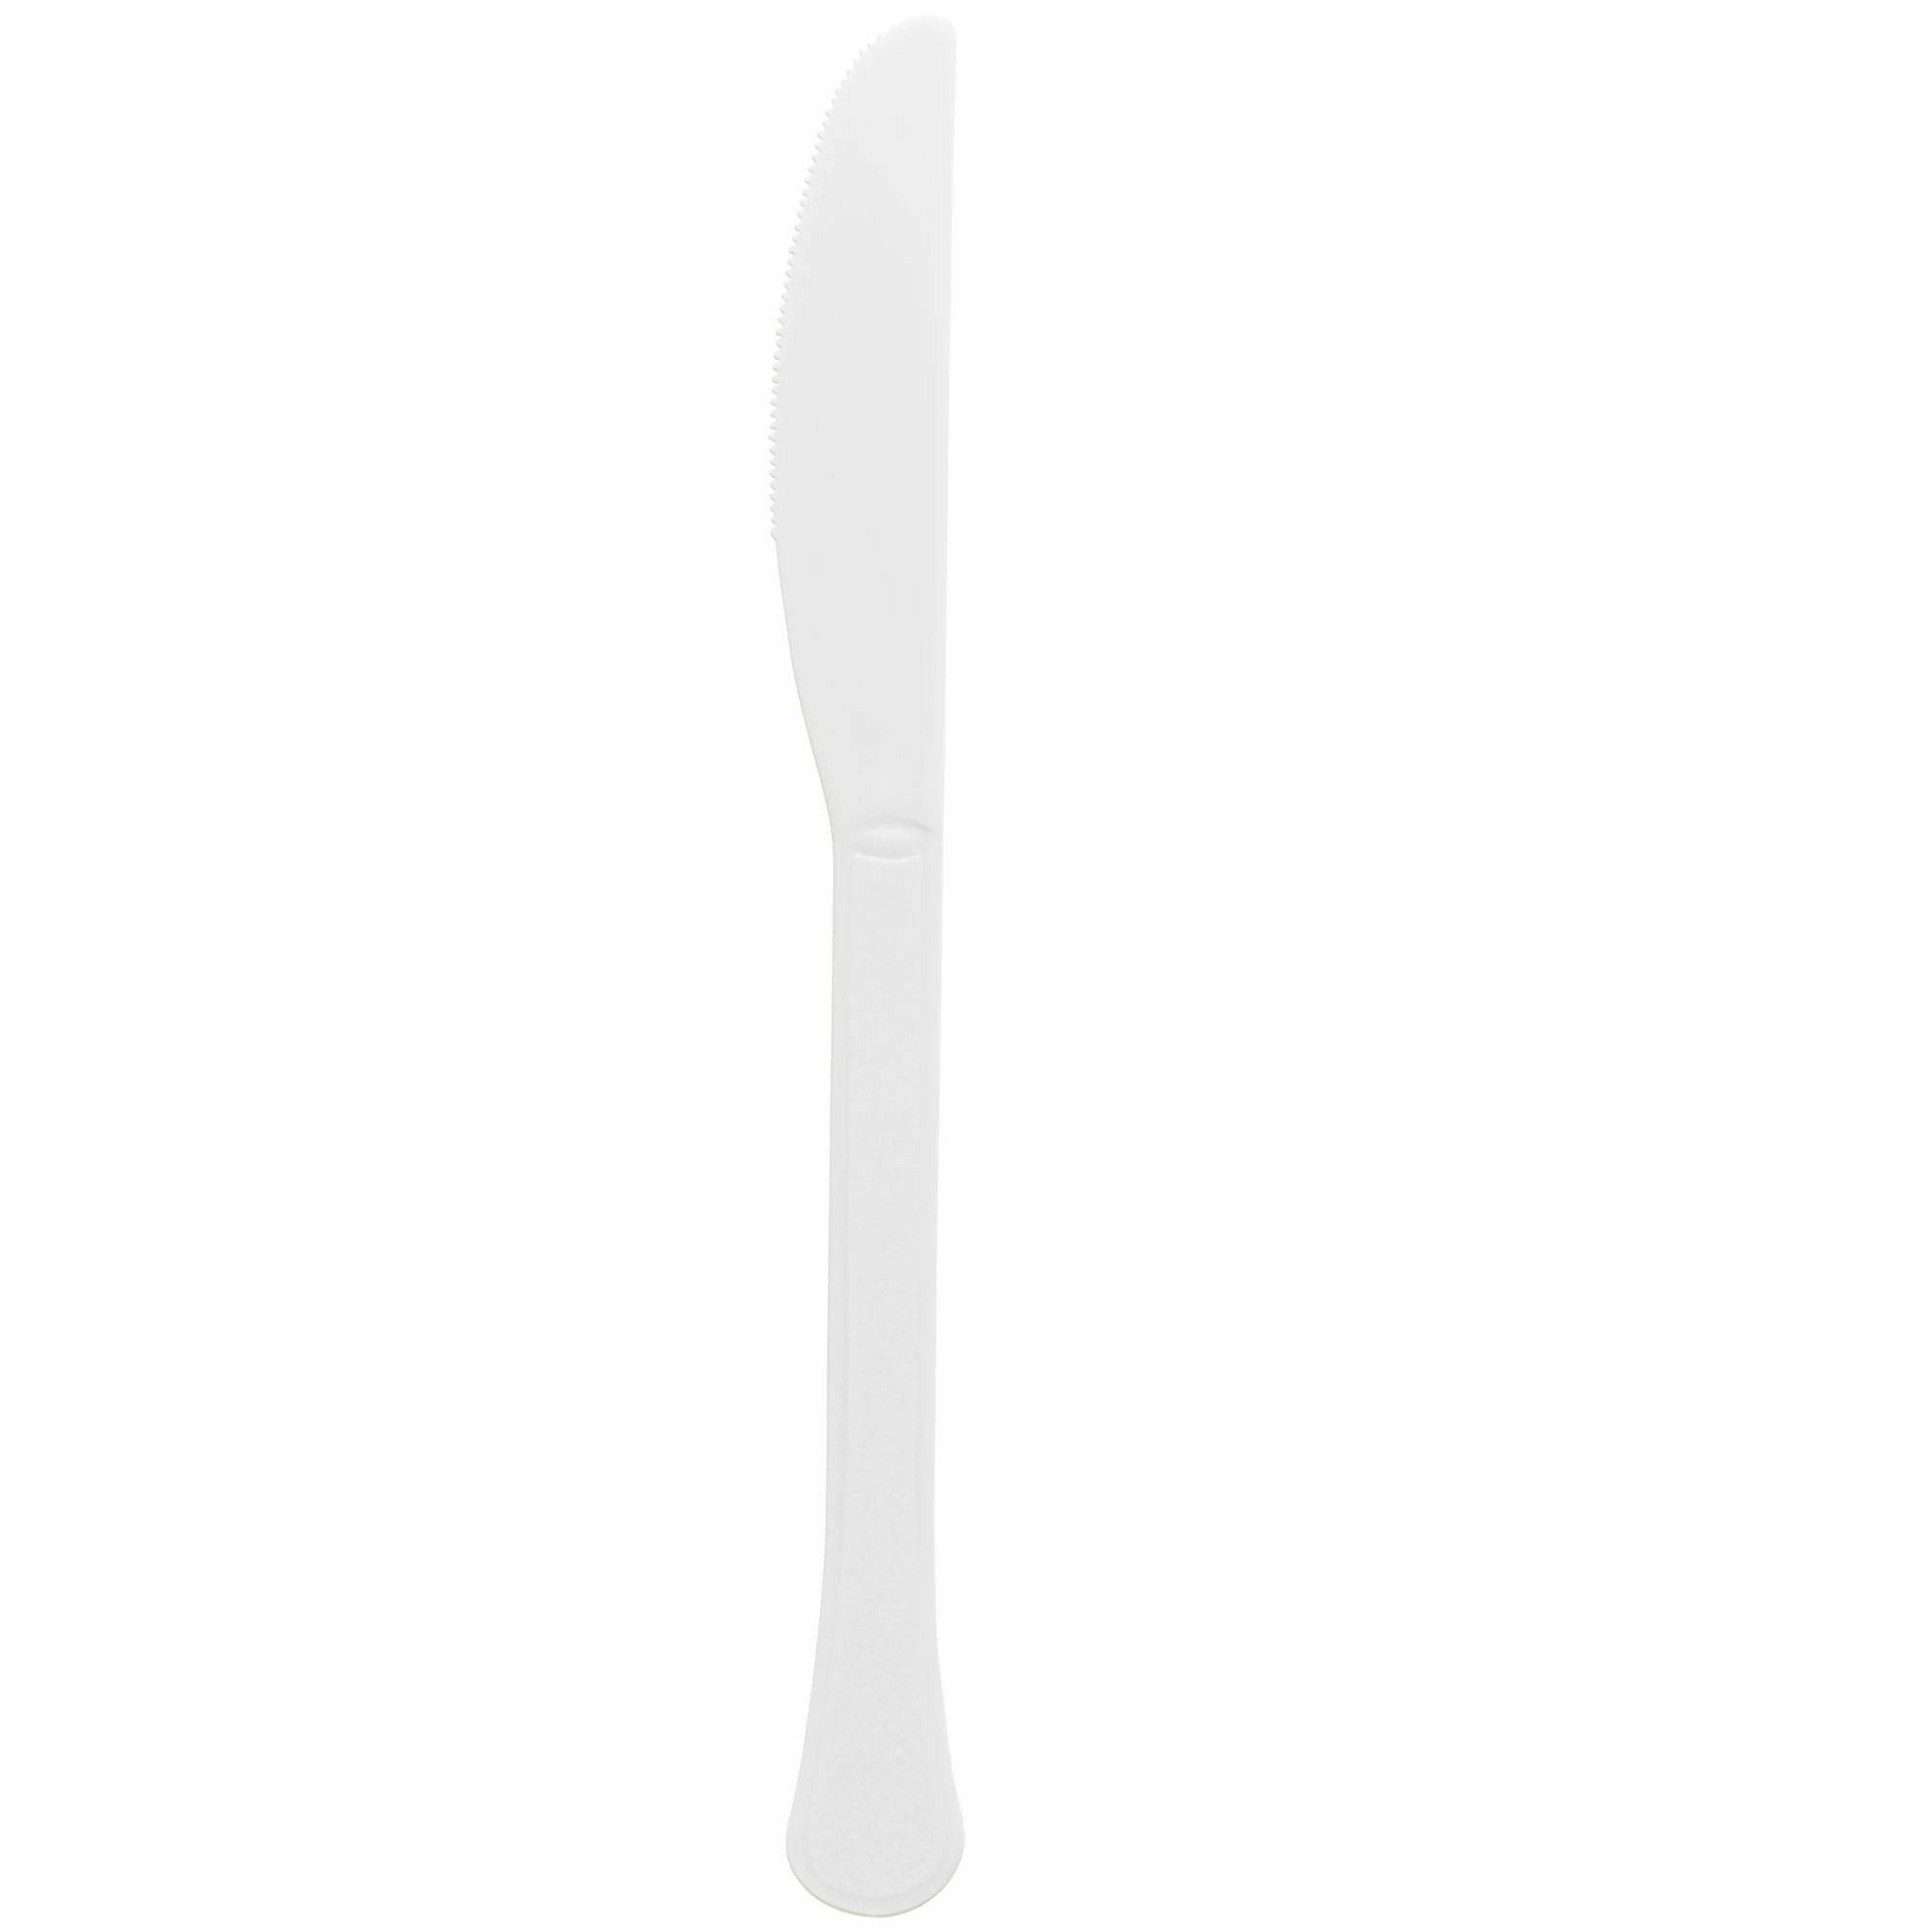 Amscan BASIC Frosty White - Boxed, Heavy Weight Knives, 20 Ct.